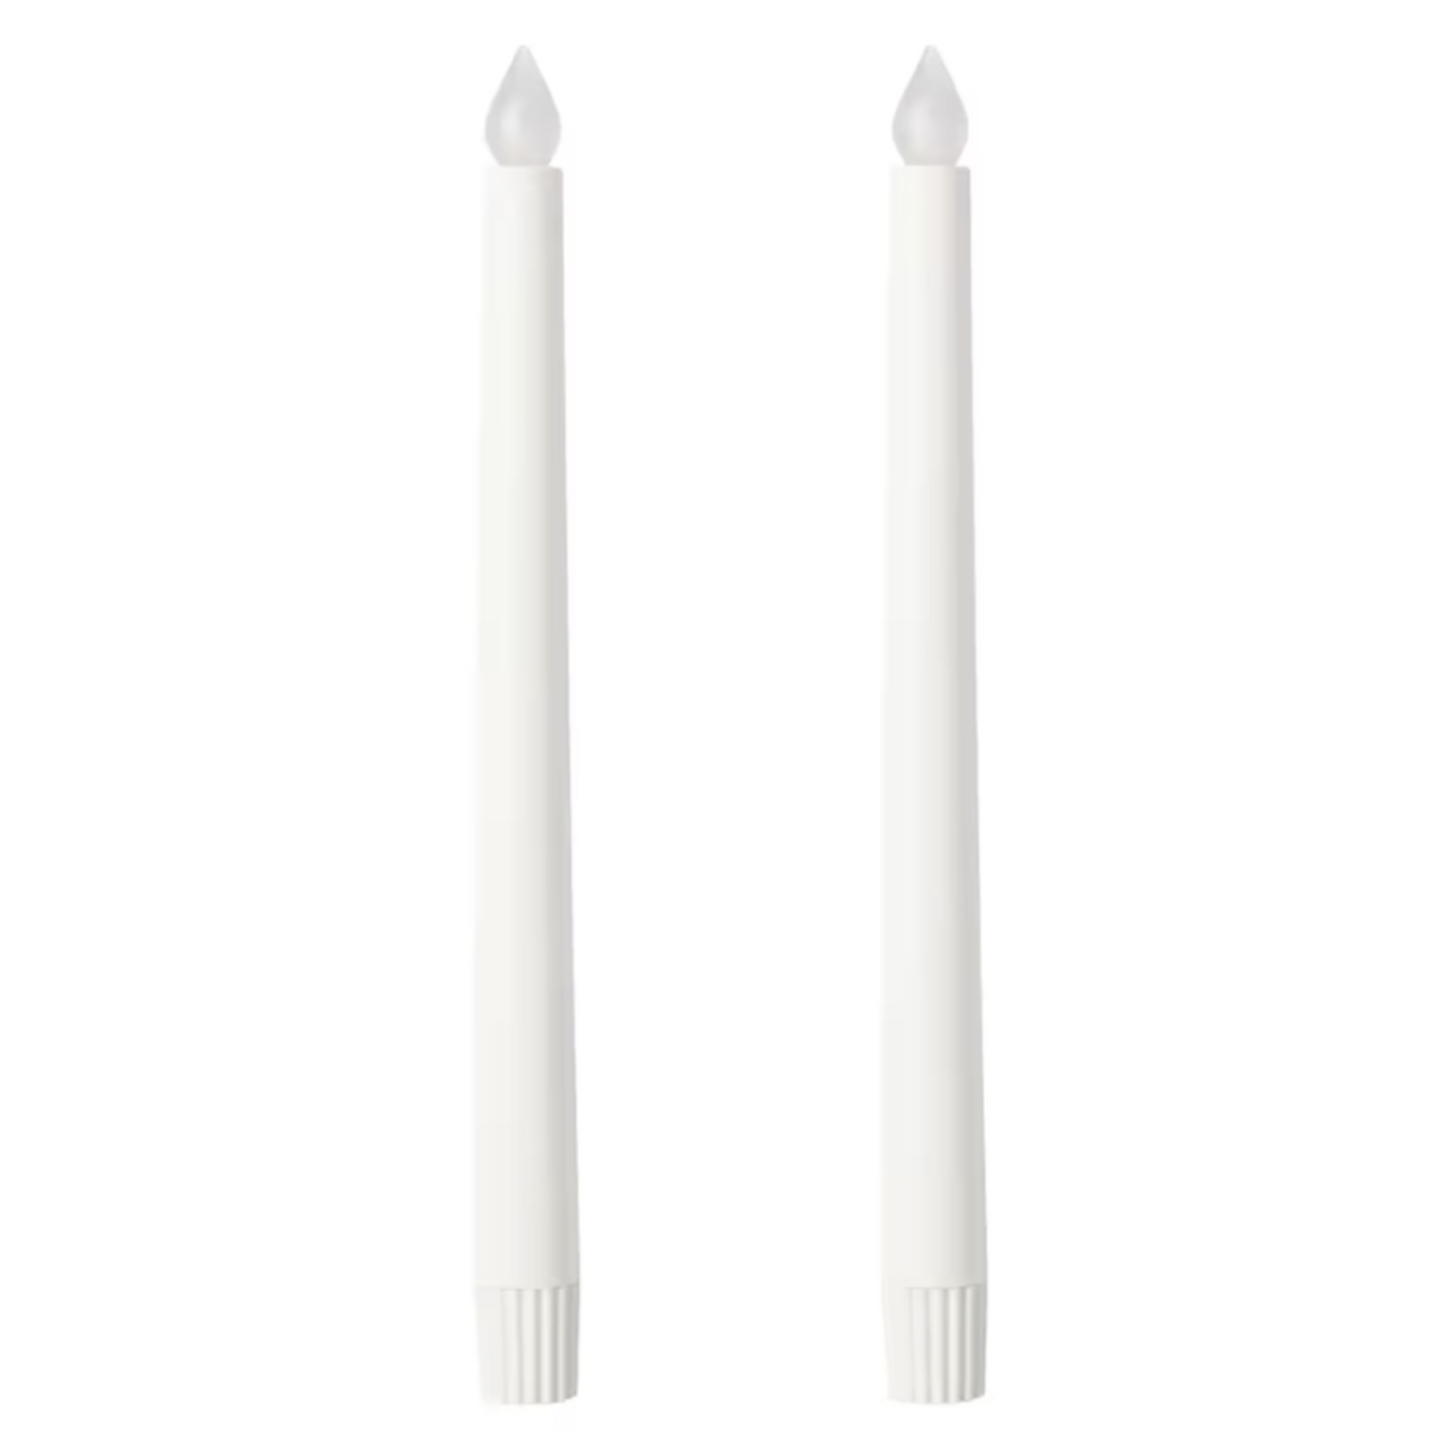 IKEA Adellovtrad LED Candle 2-Pack (8041197764895)